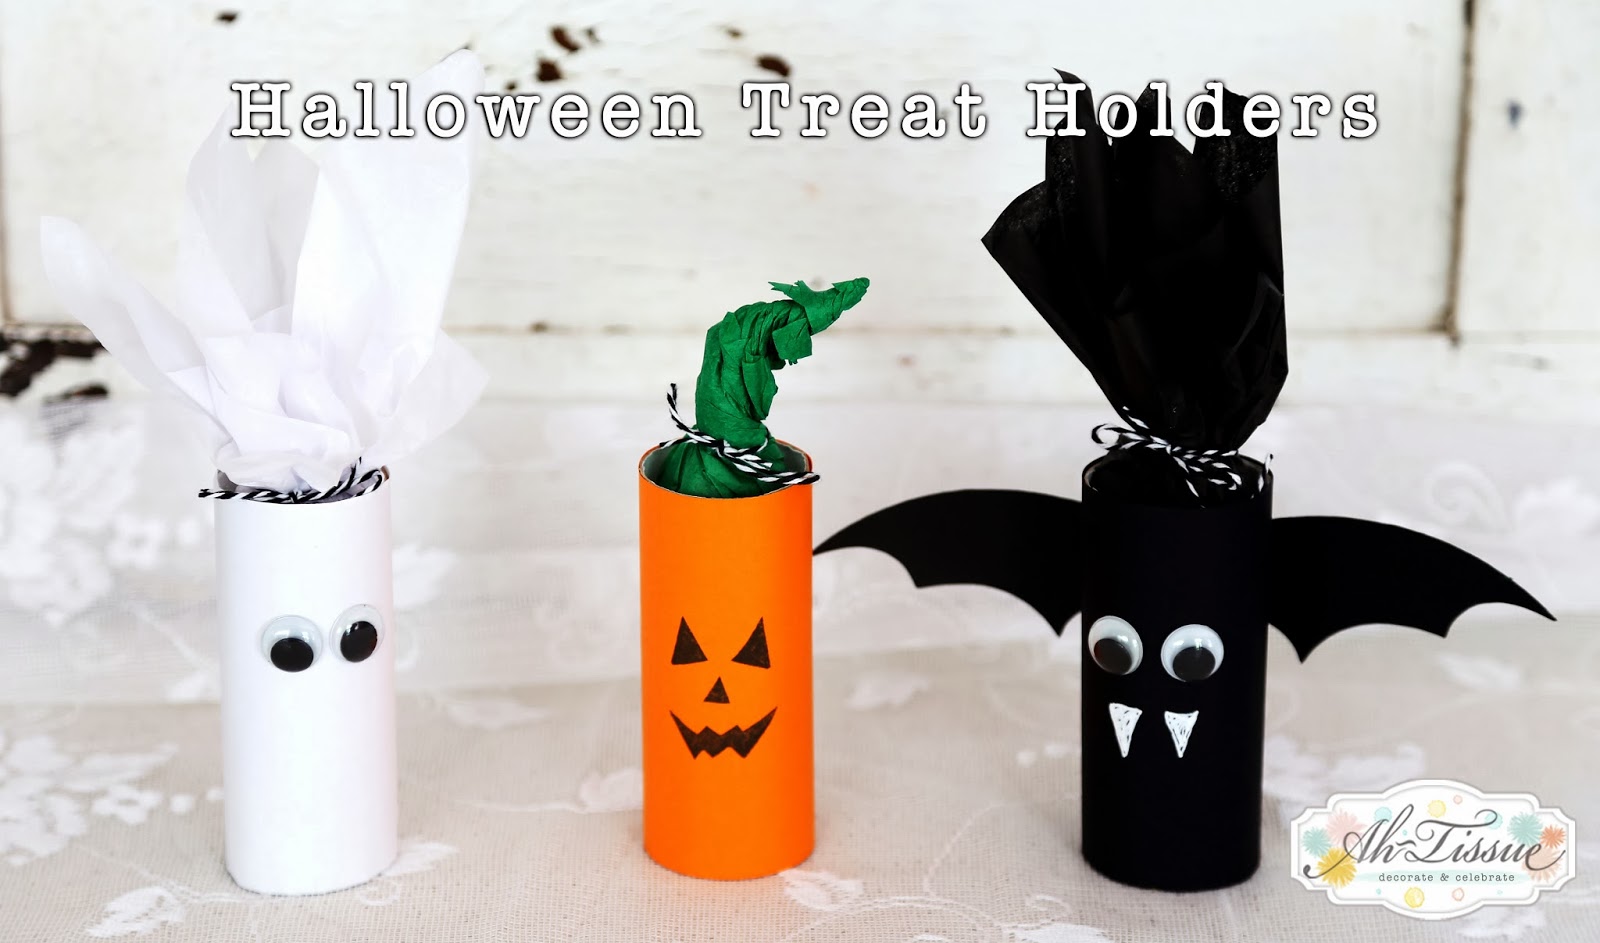 Get Your D.I.Y On!!: Halloween treat holders made from recycled toilet ...